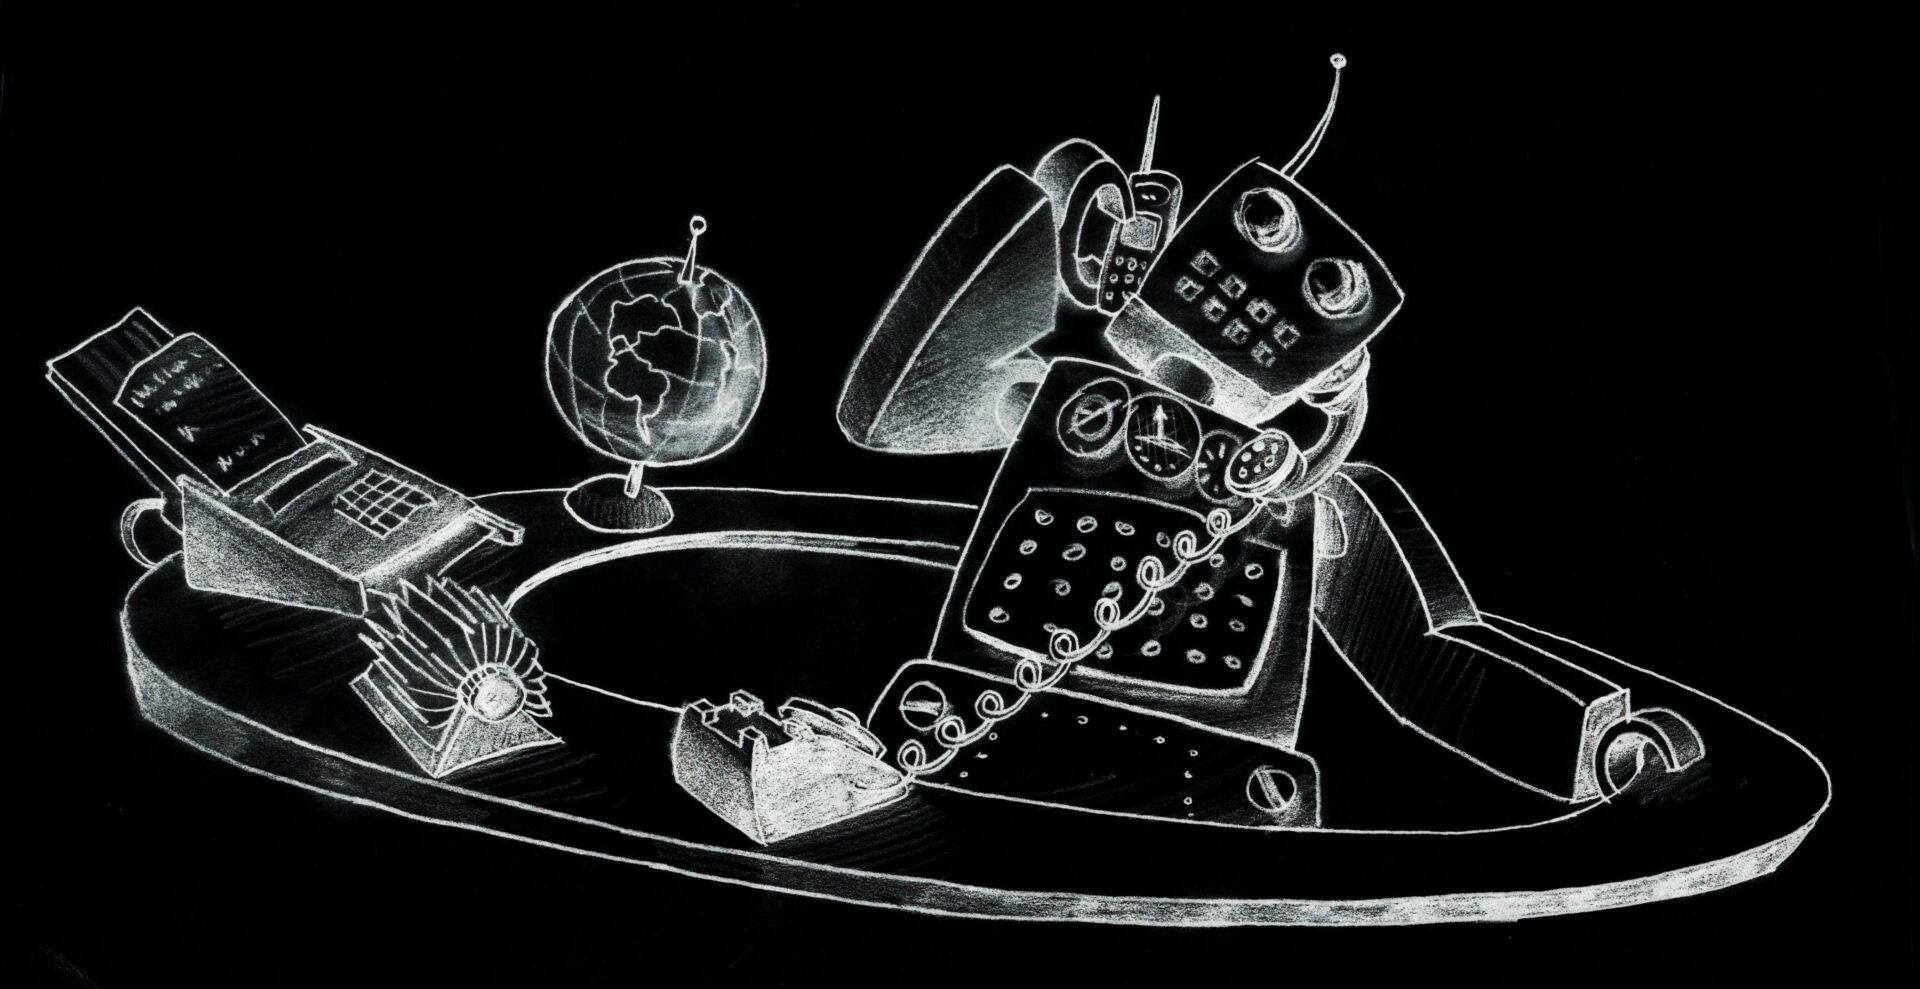 A white-on-black chalk sketch of various office supplies and devices, including a telephone, calculator, and laptop, organized on a desk.